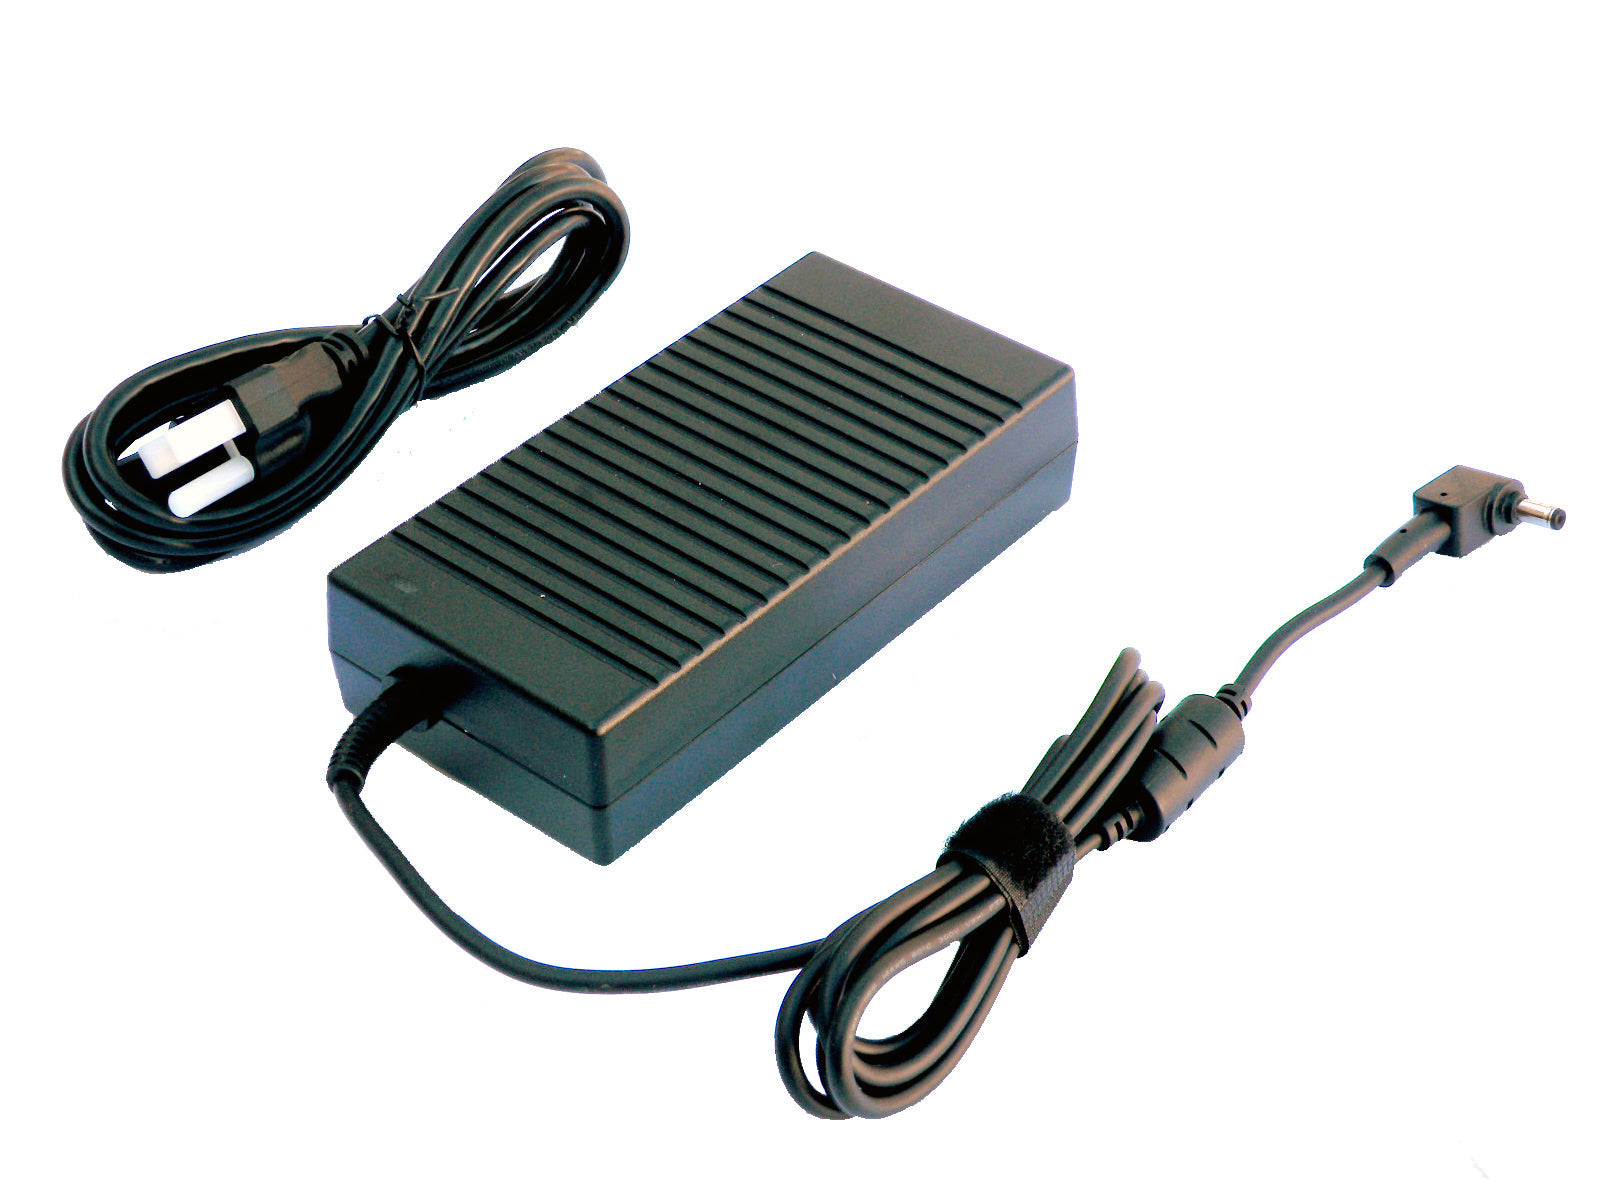 Picture of the AC power adapter